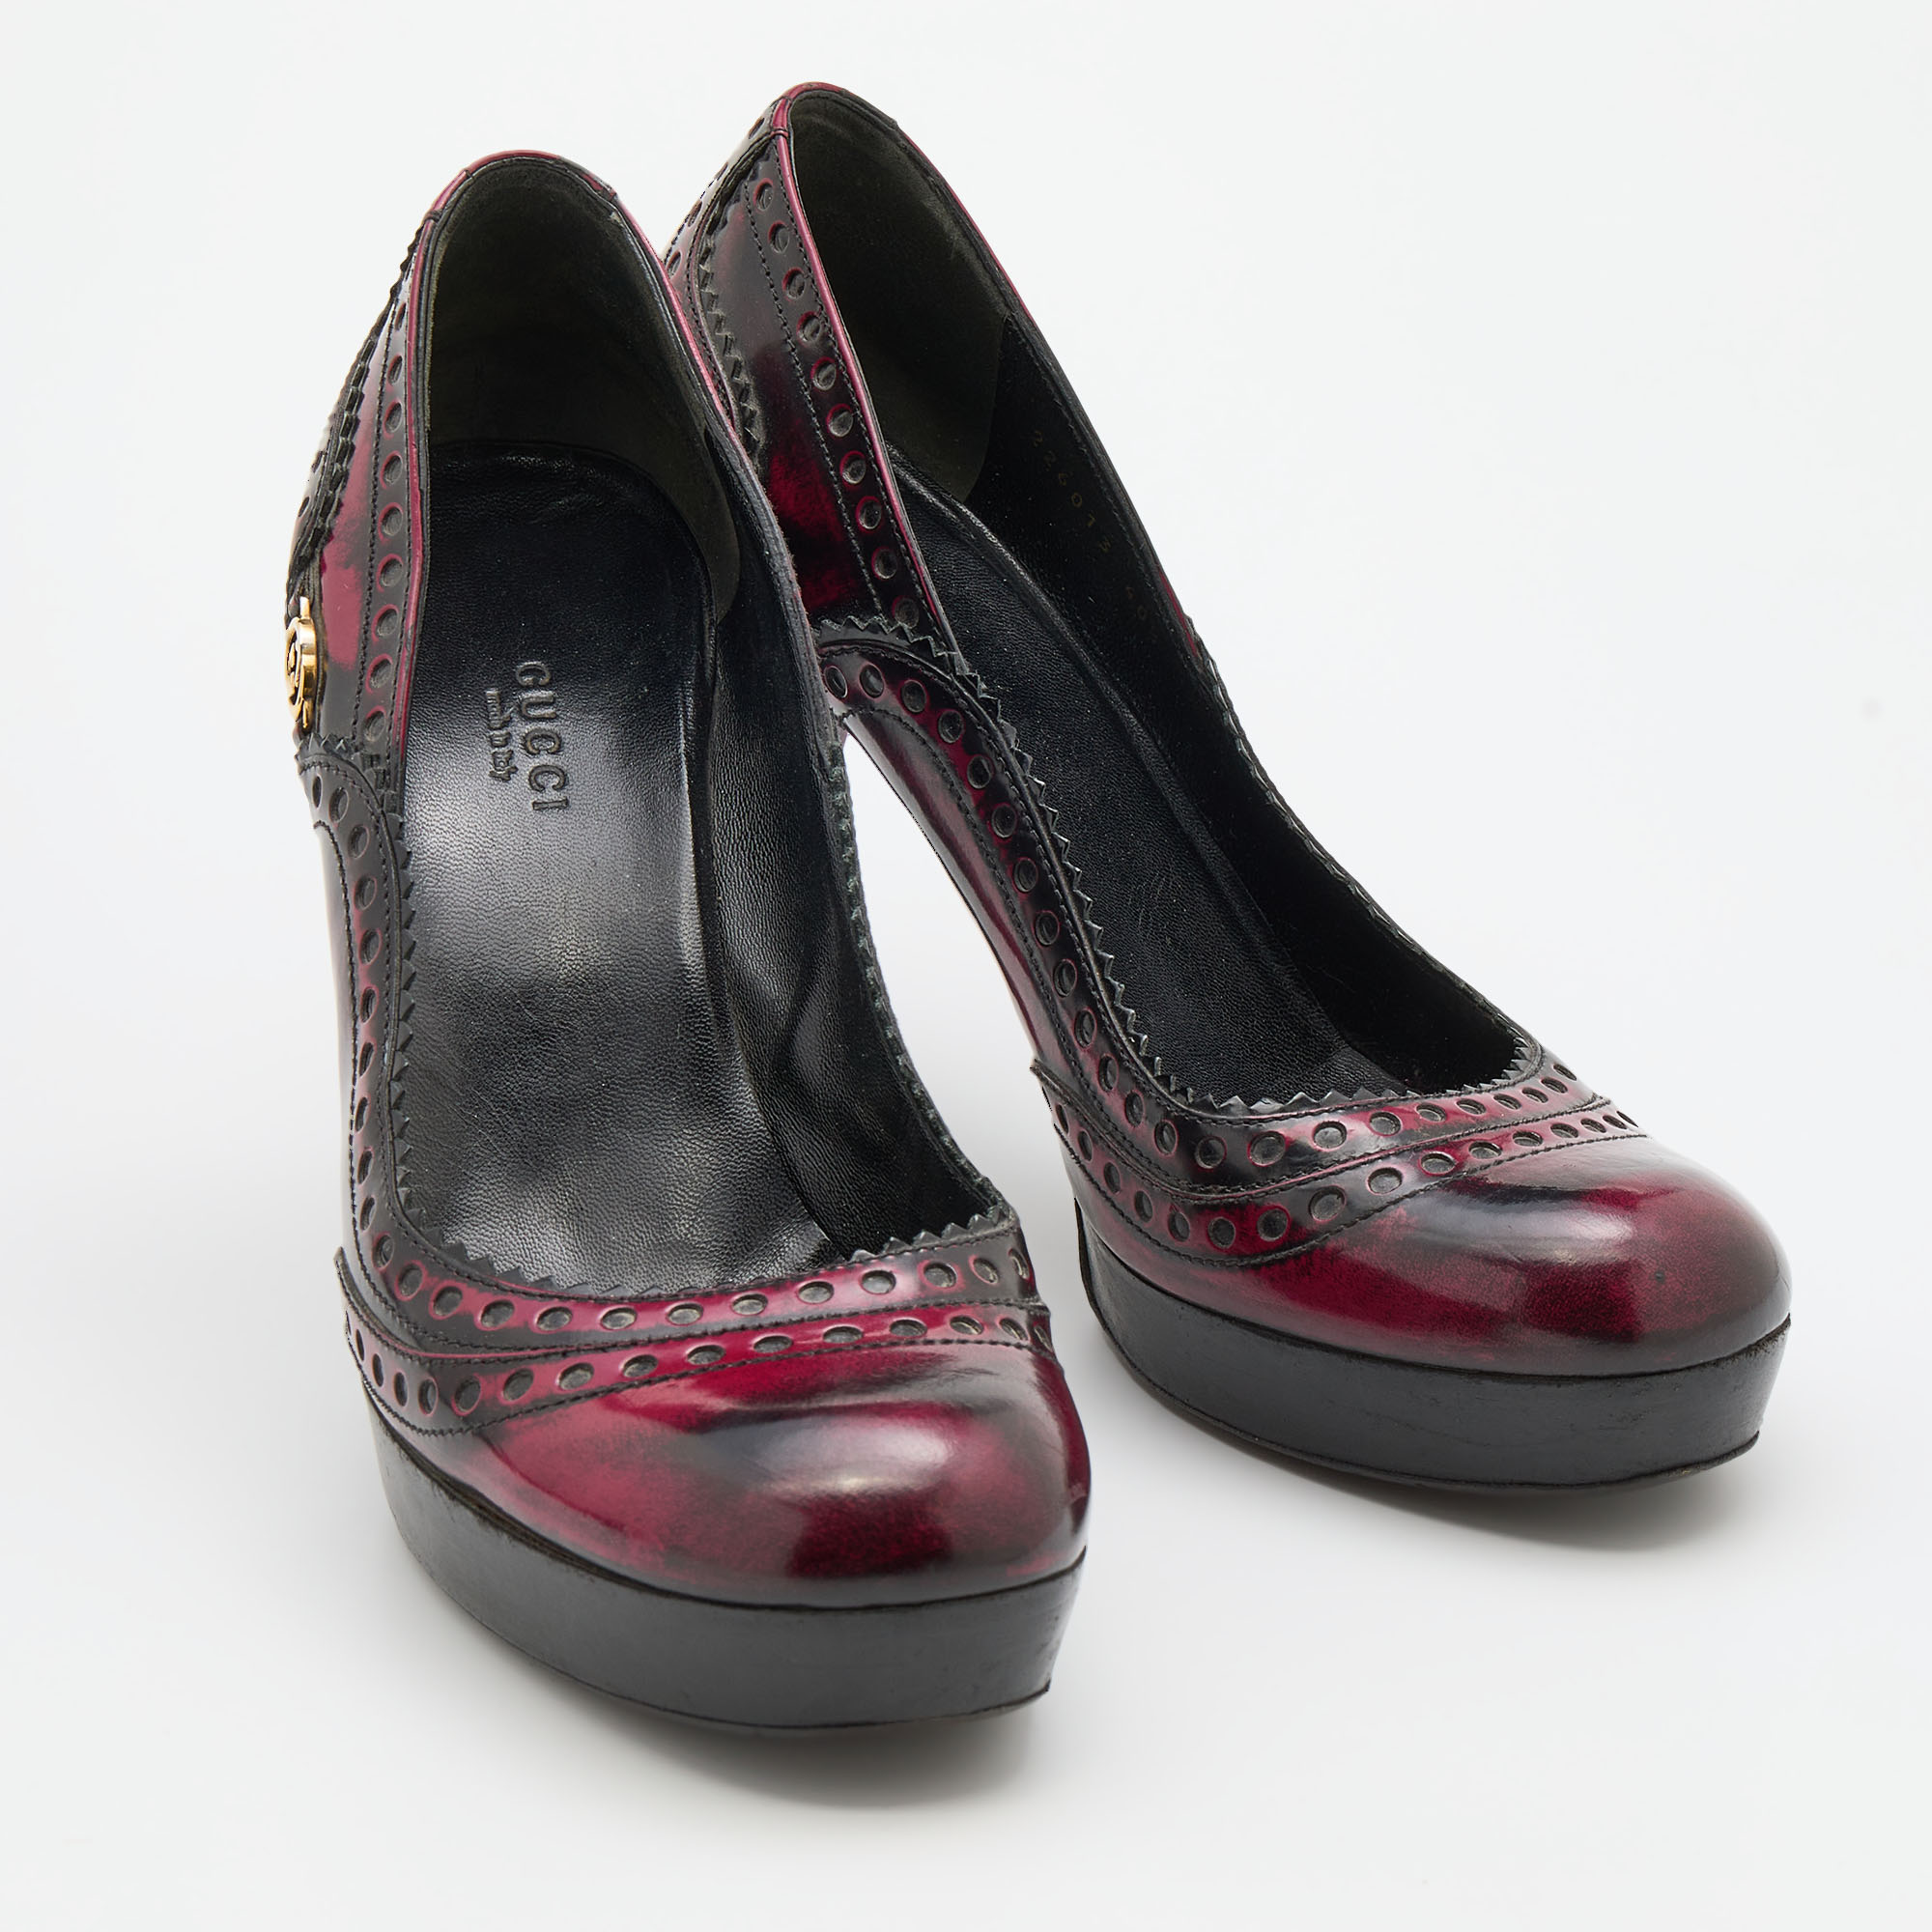 Gucci Black/Red Two-Tone Brogue Leather Platform Pumps Size 40.5